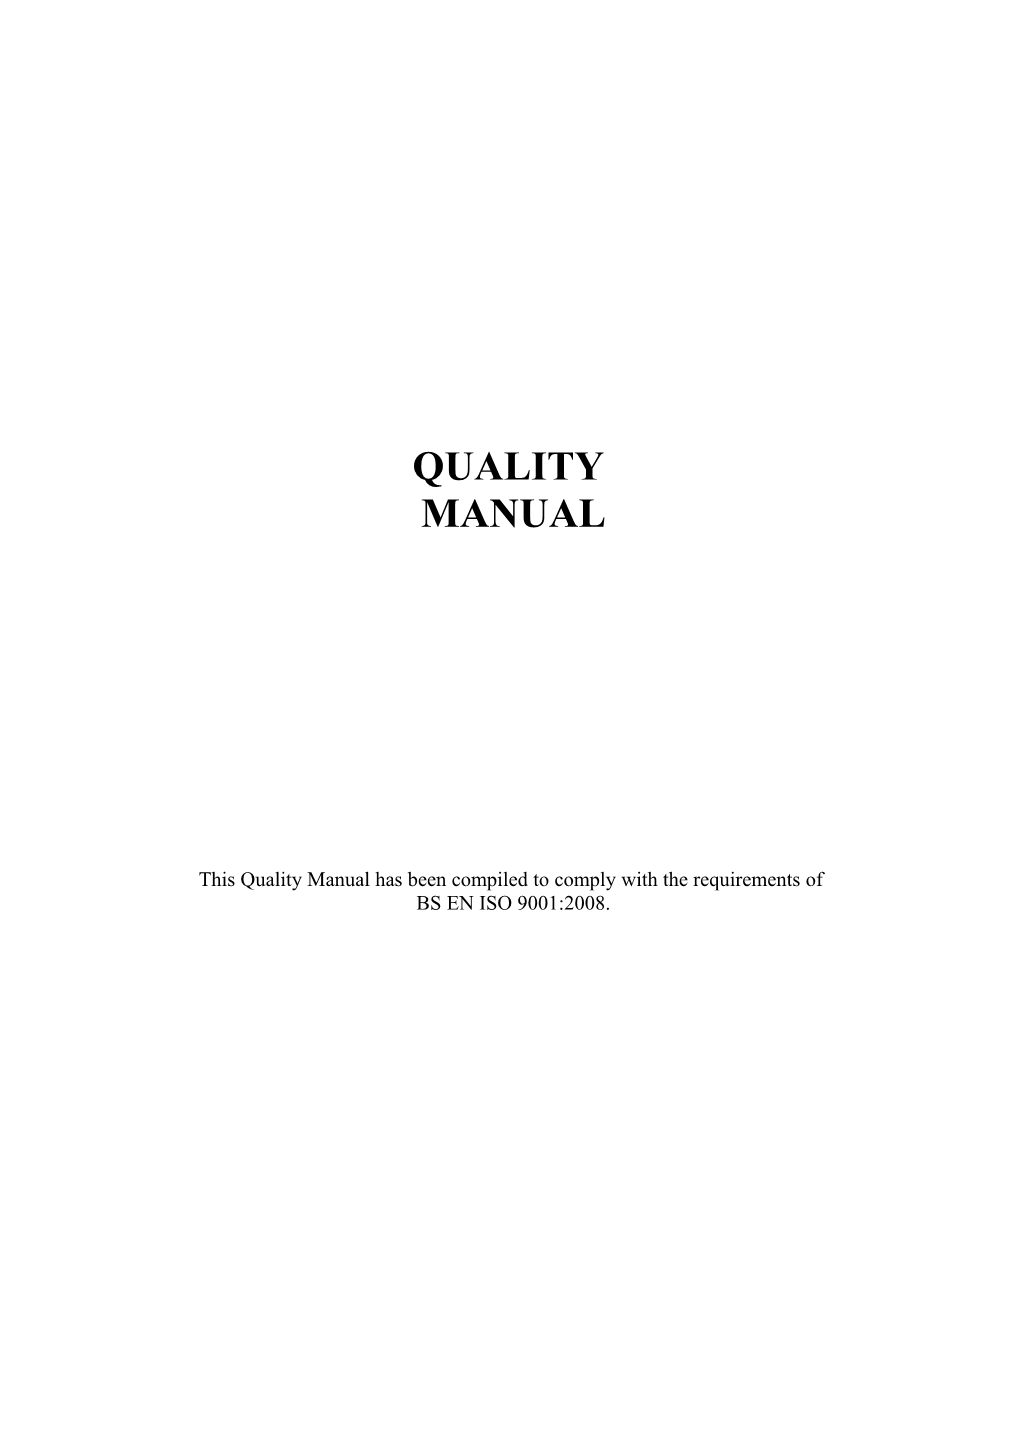 This Quality Manual Has Been Compiled to Comply with the Requirements Of